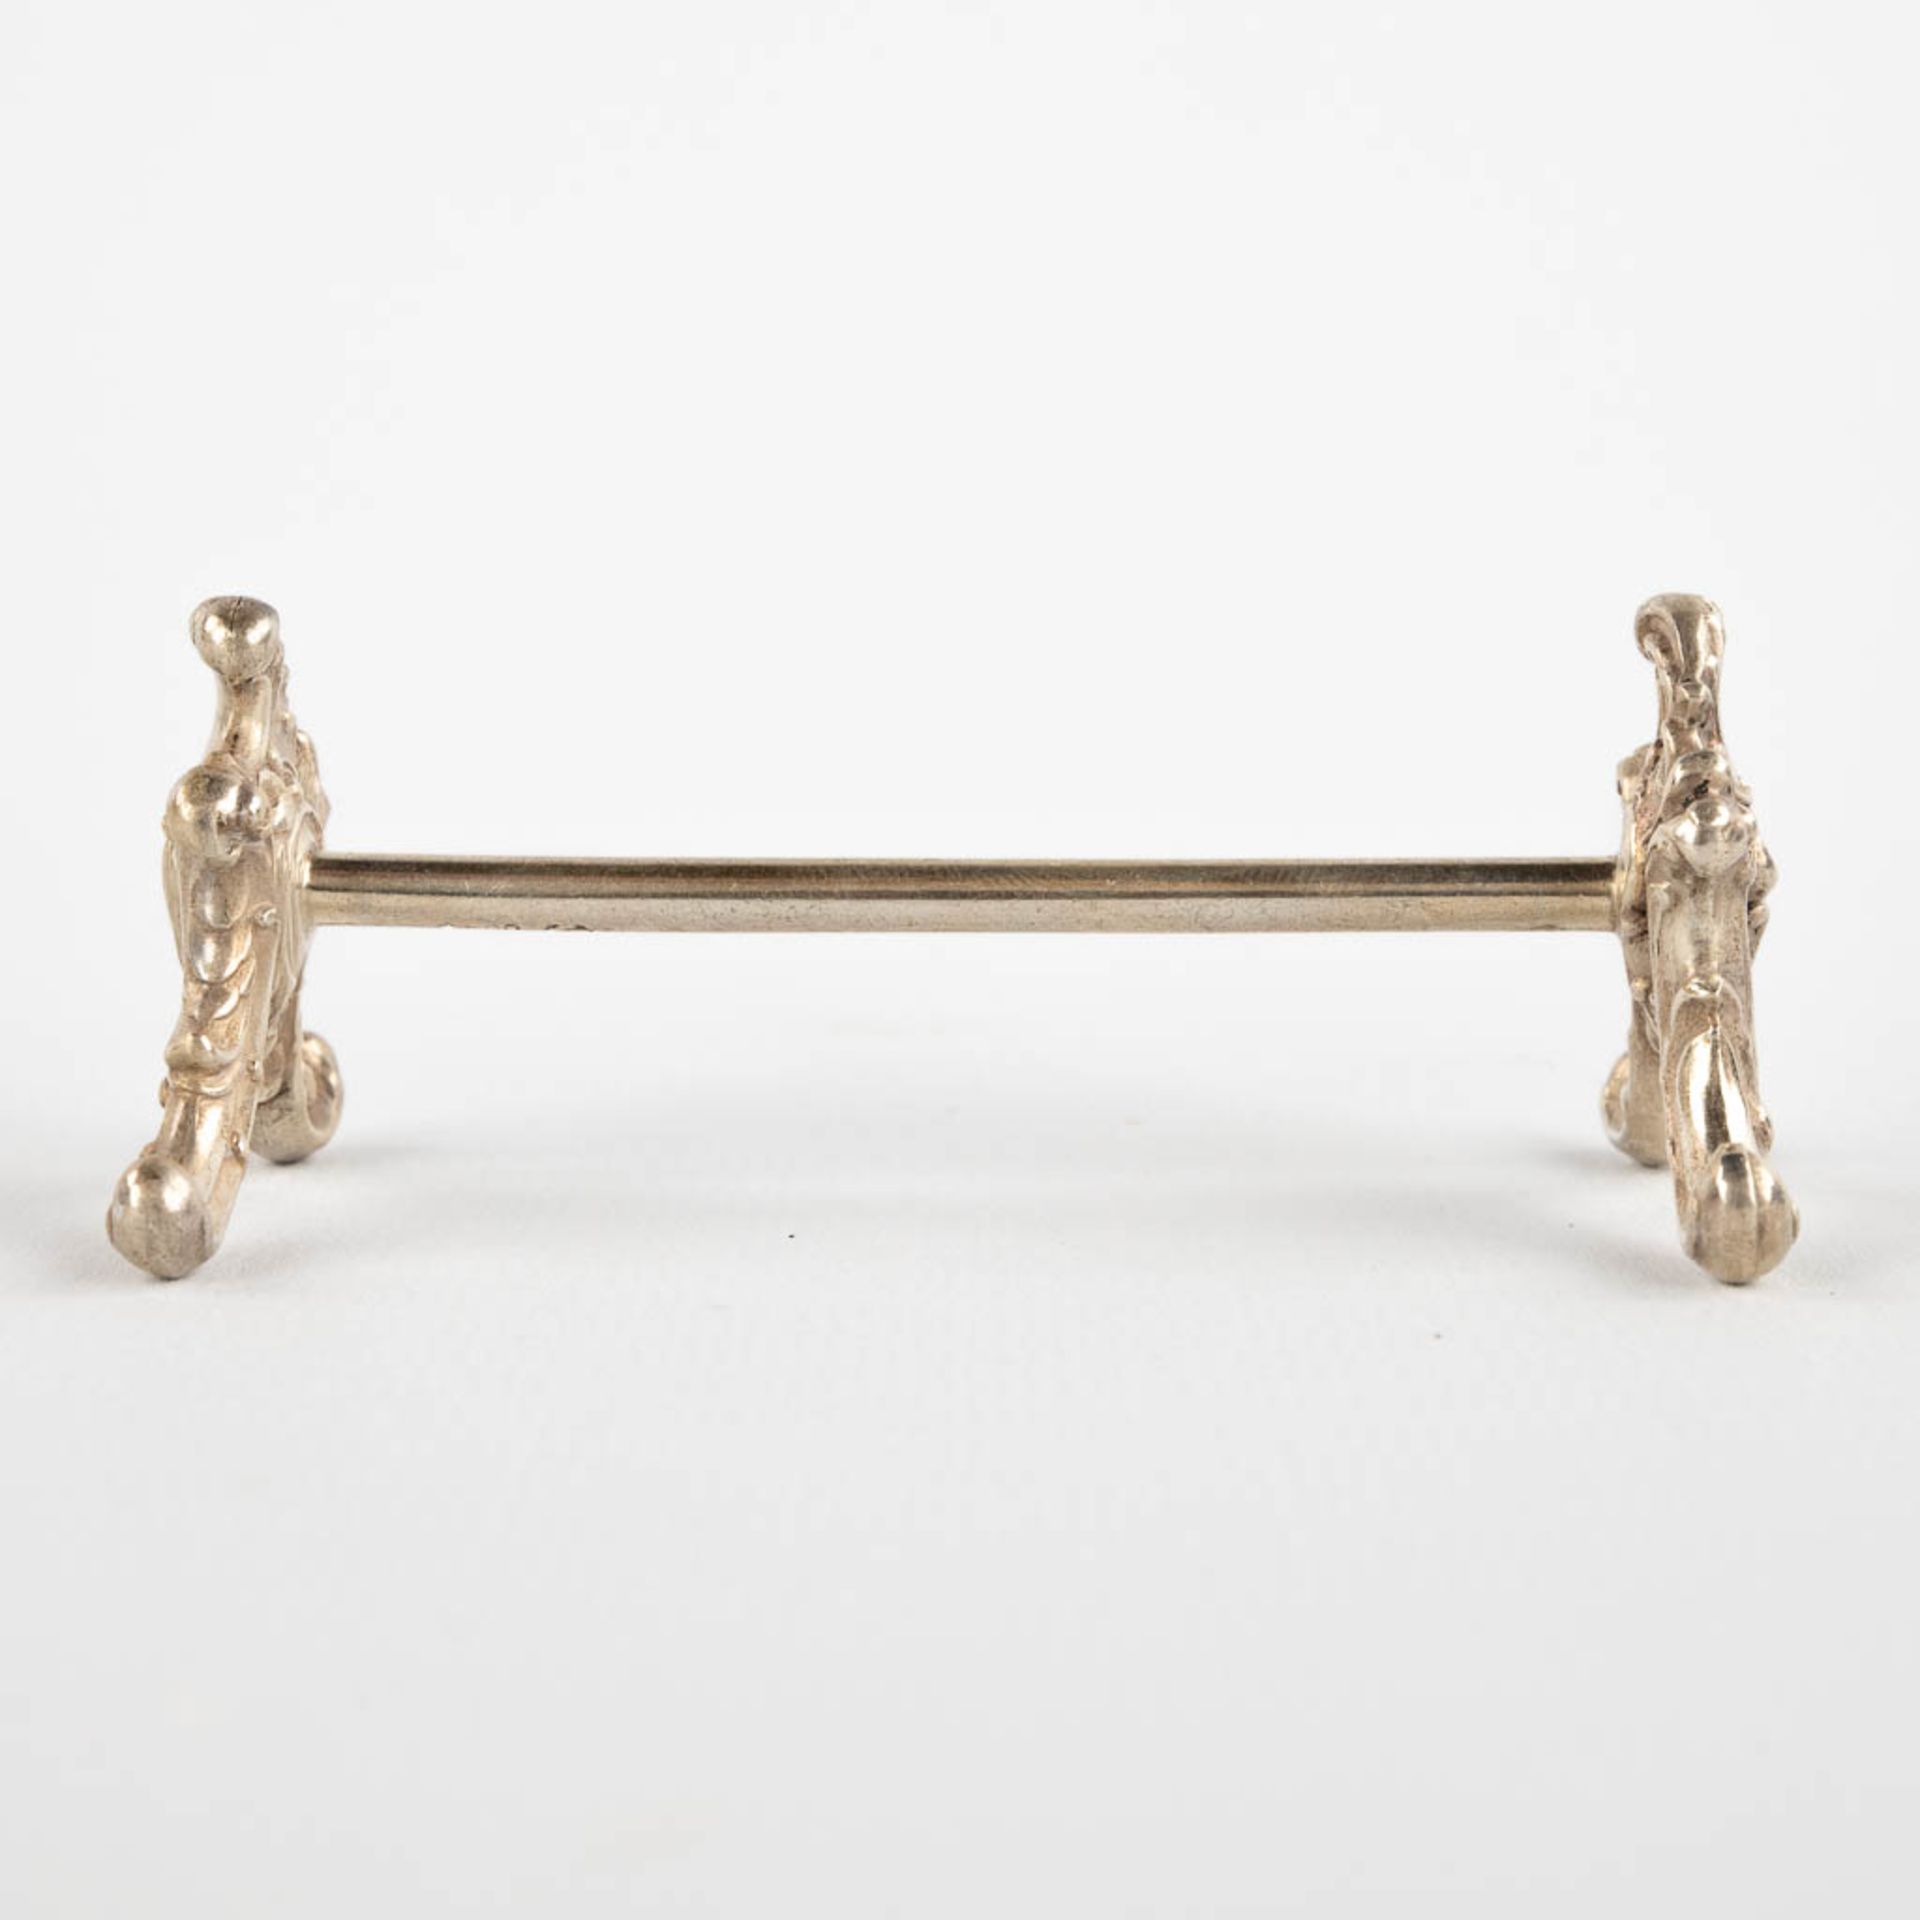 12 silver knife rests, Louis XV style, Germany. 324g. (D:9 x H:3,5 cm) - Image 6 of 9